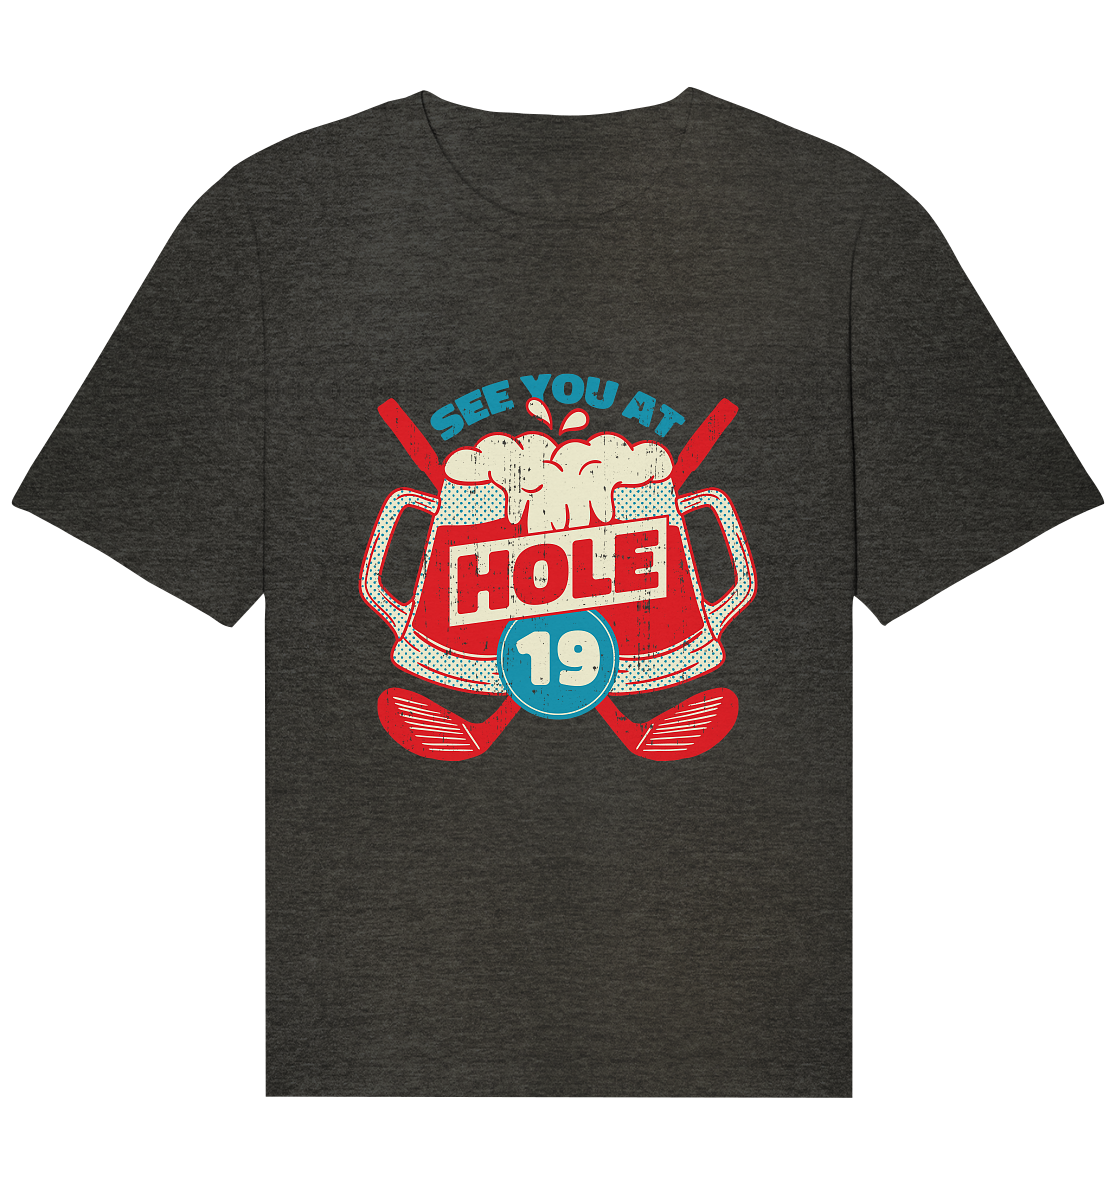 Golf ,See you at Hole 19 , Wir sehen uns bei Loch 19 - Organic Relaxed Shirt